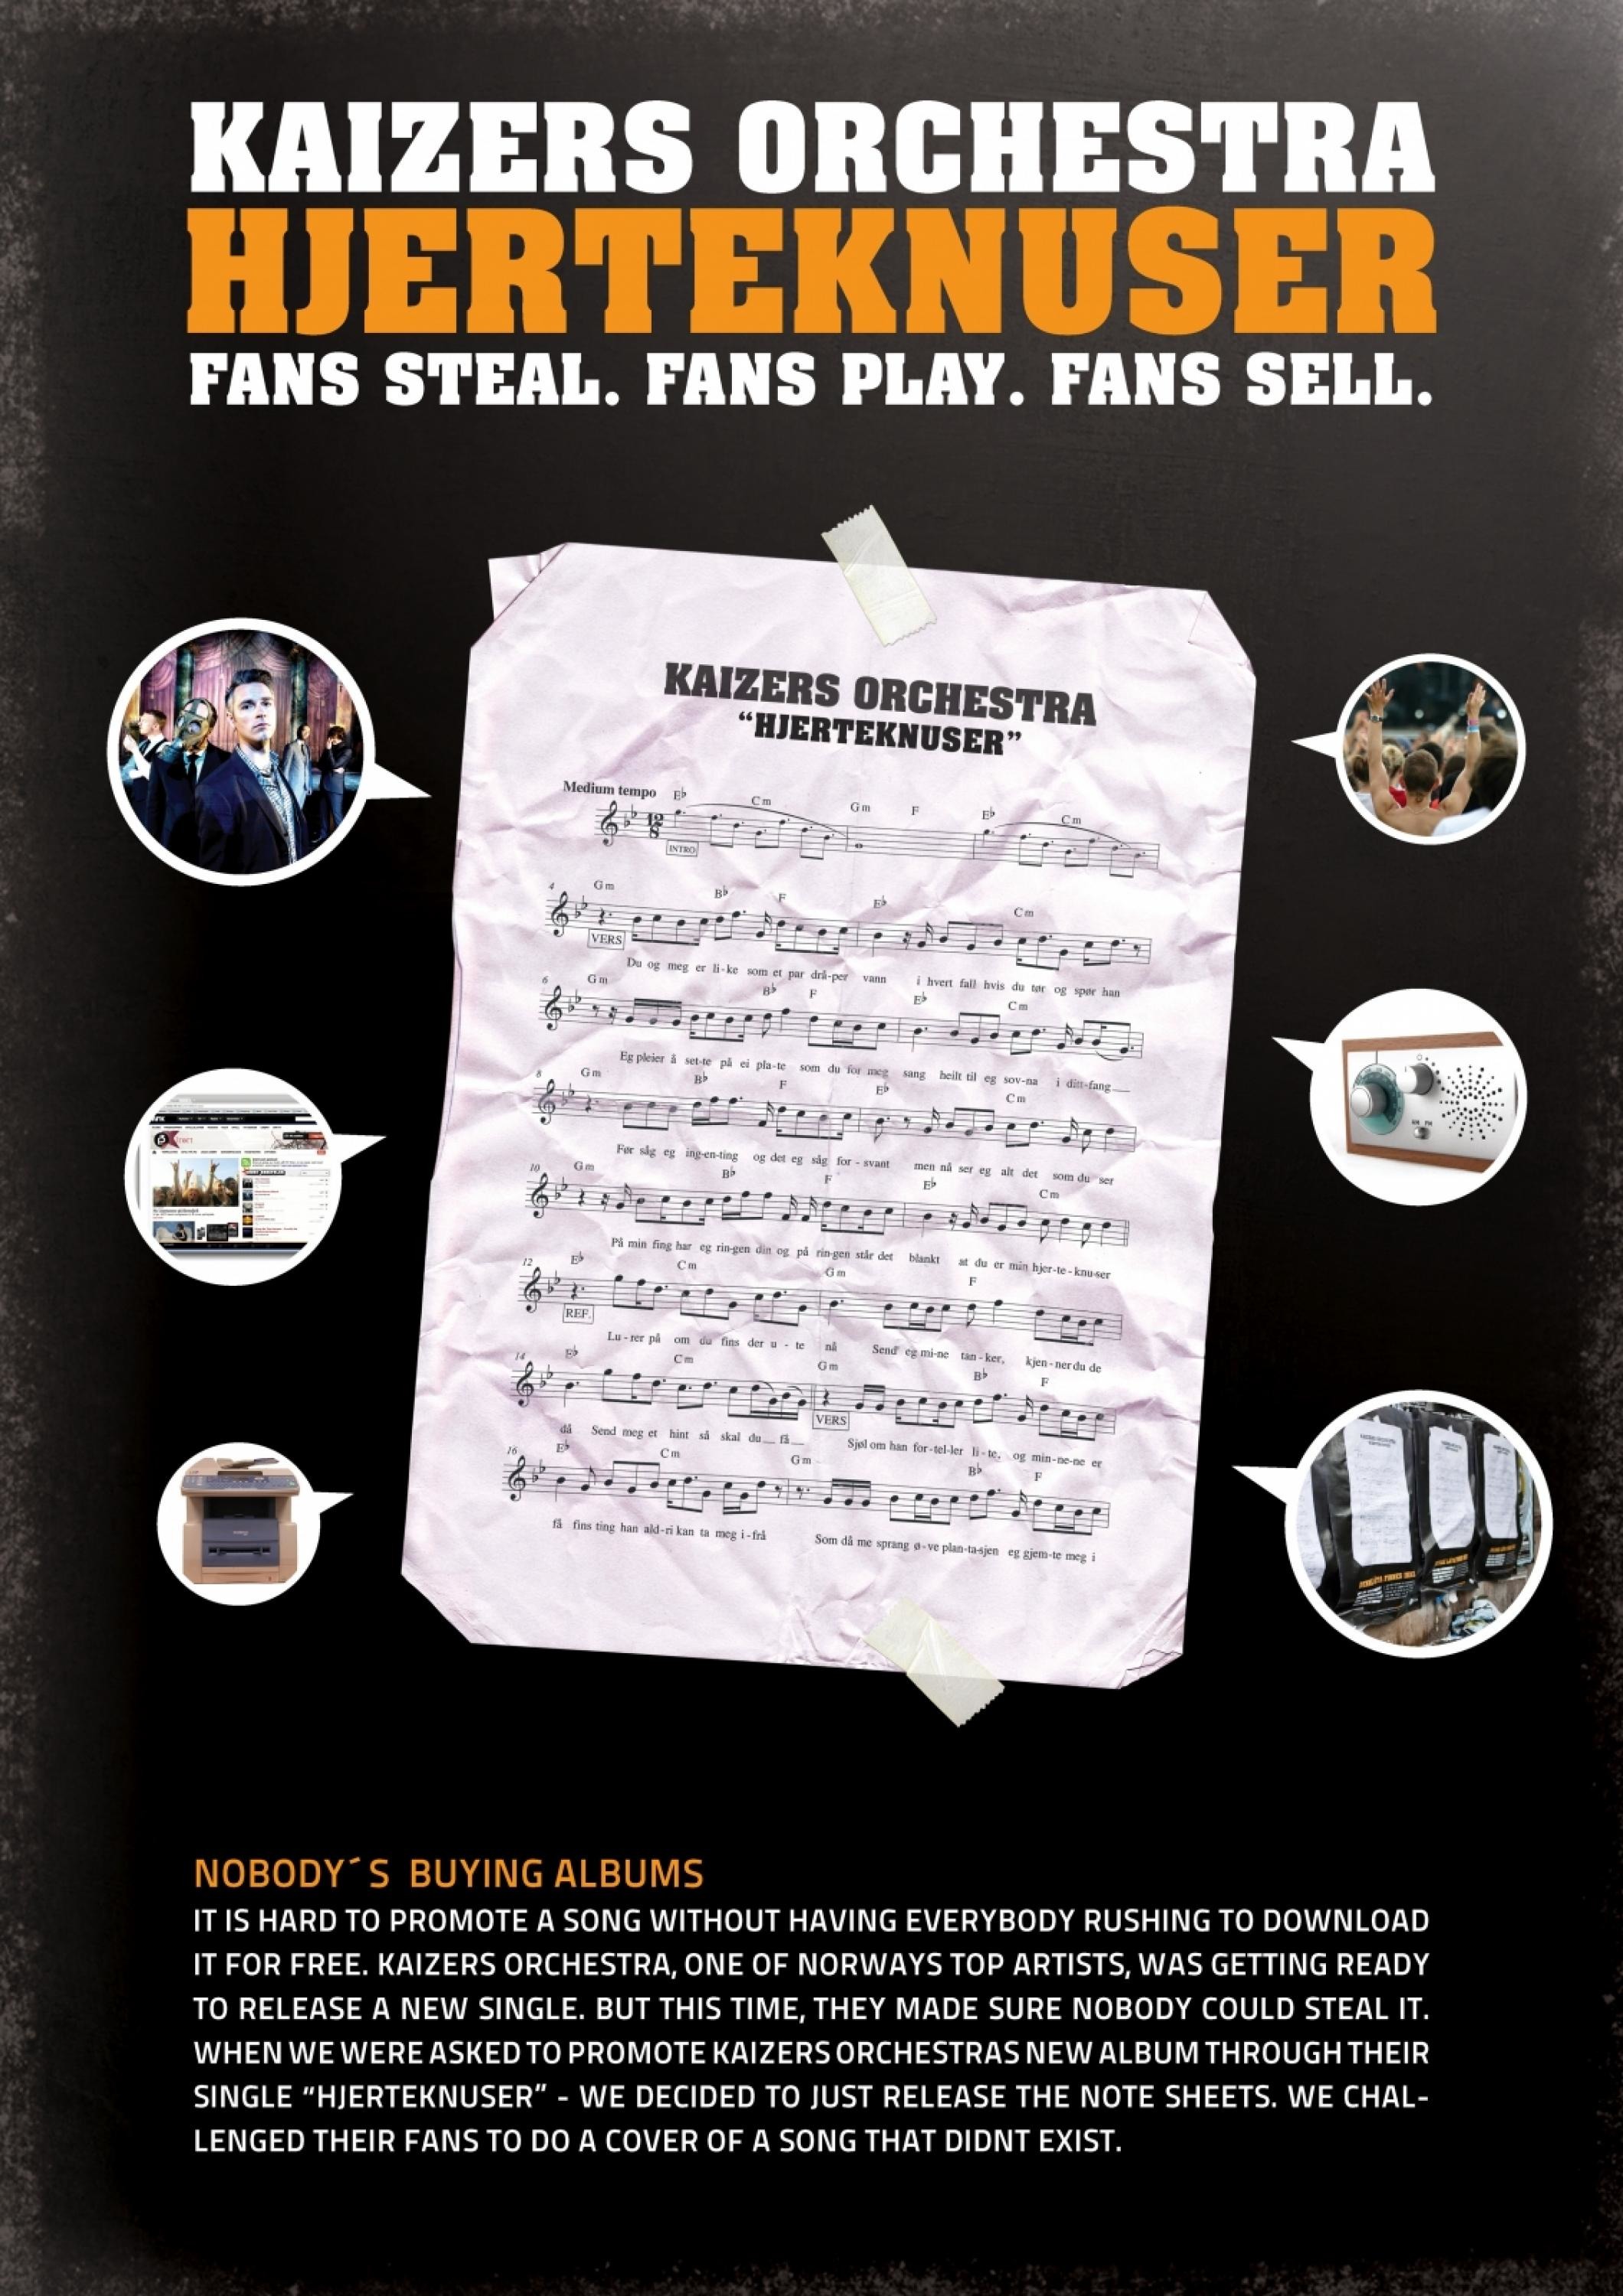 KAIZERS ORCHESTRA FANS